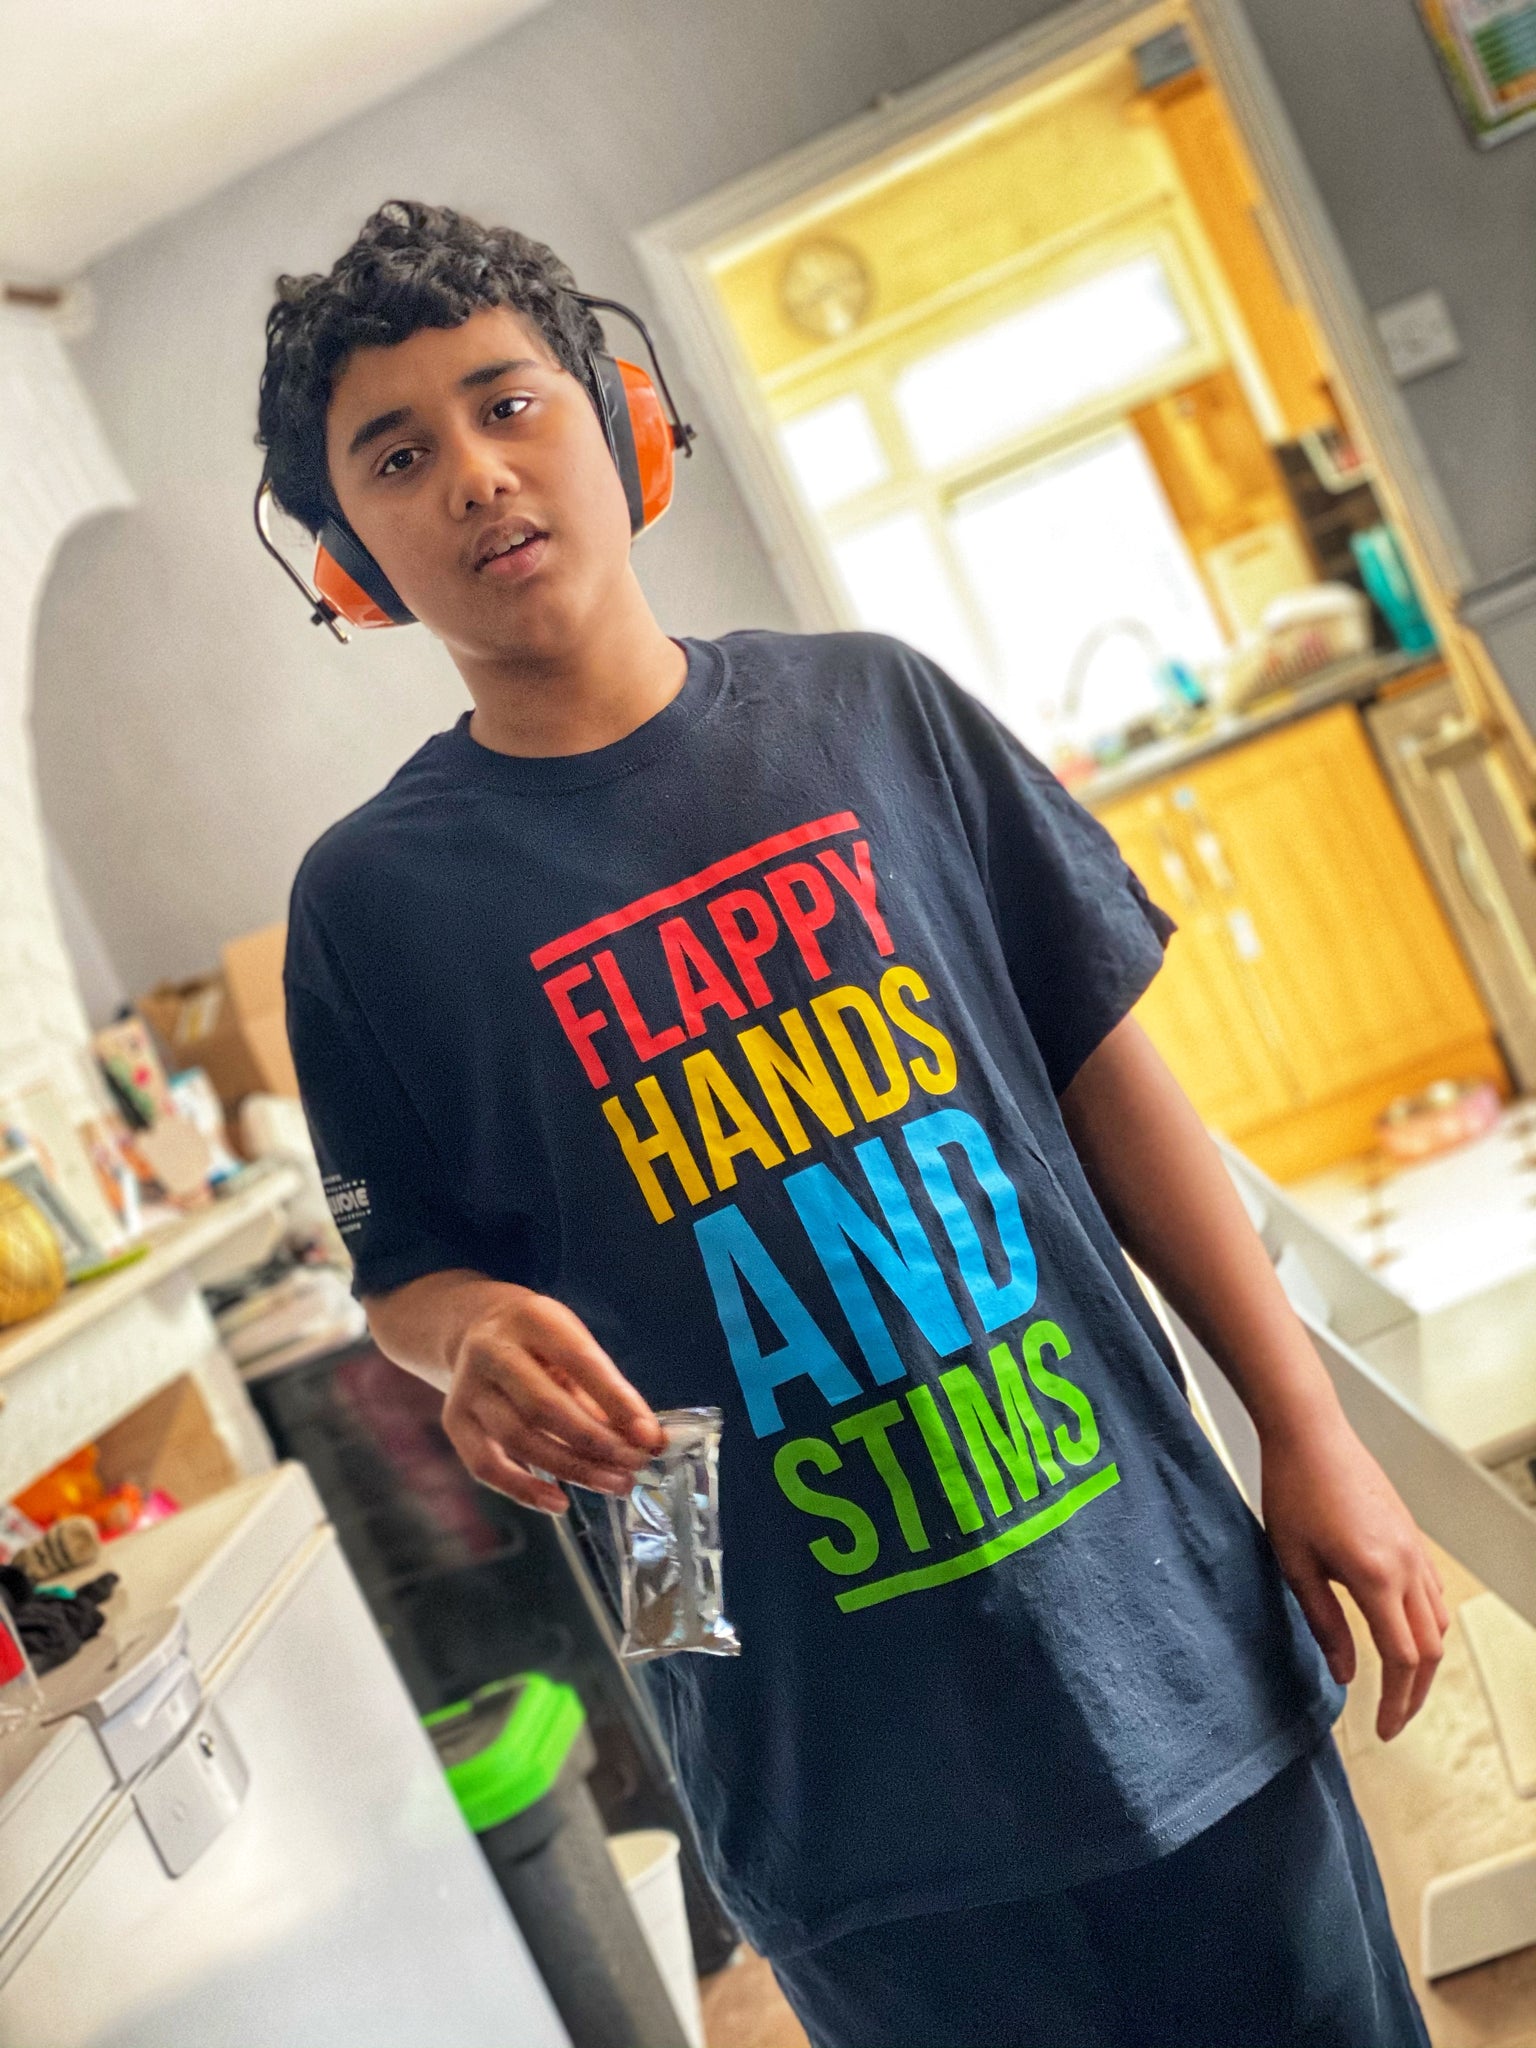 Flappy Hands And Stims t-shirt